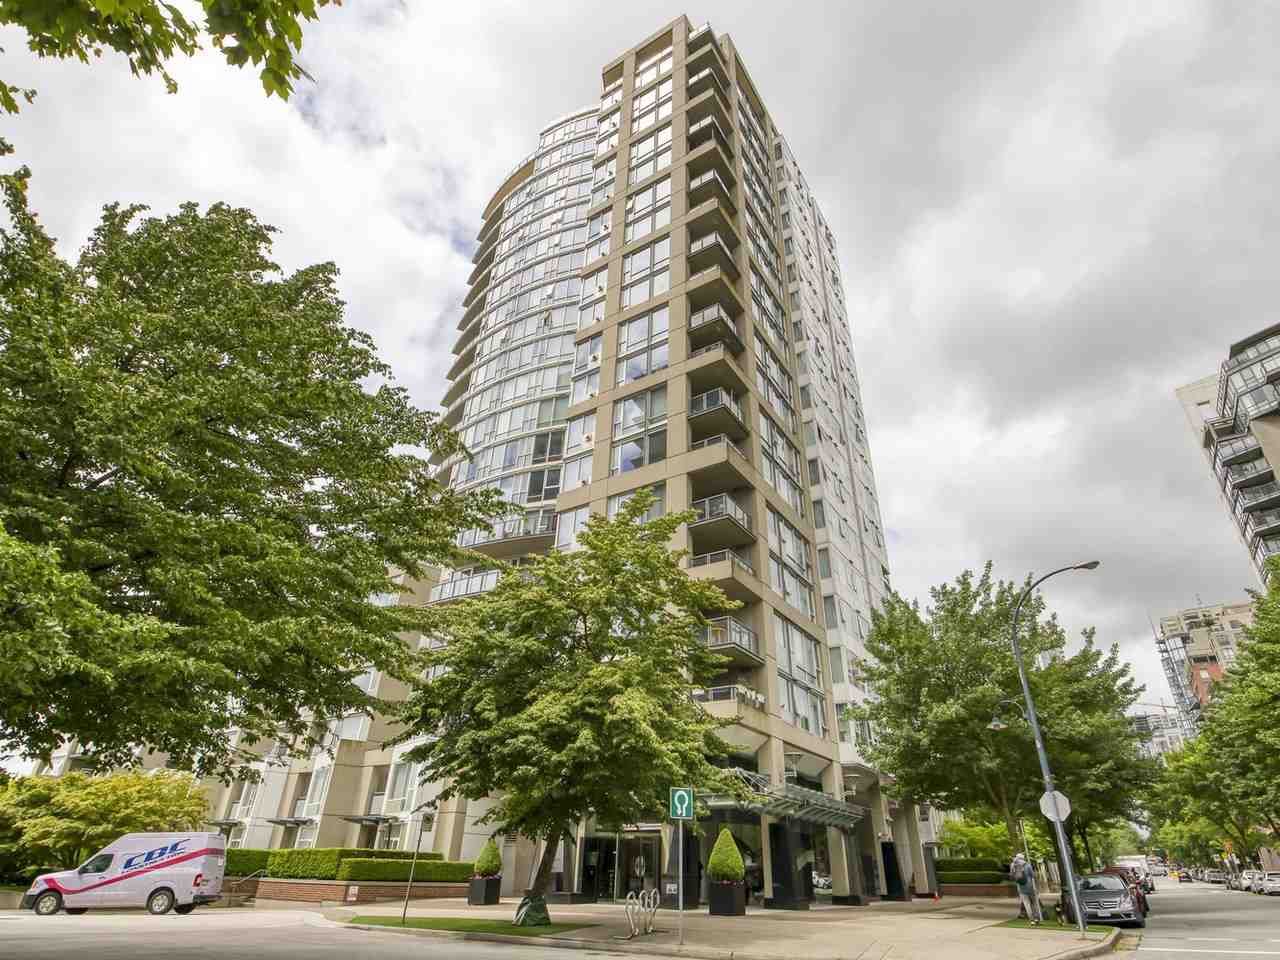 Main Photo: 510 1383 MARINASIDE CRESCENT in : Yaletown Condo for sale : MLS®# R2466156